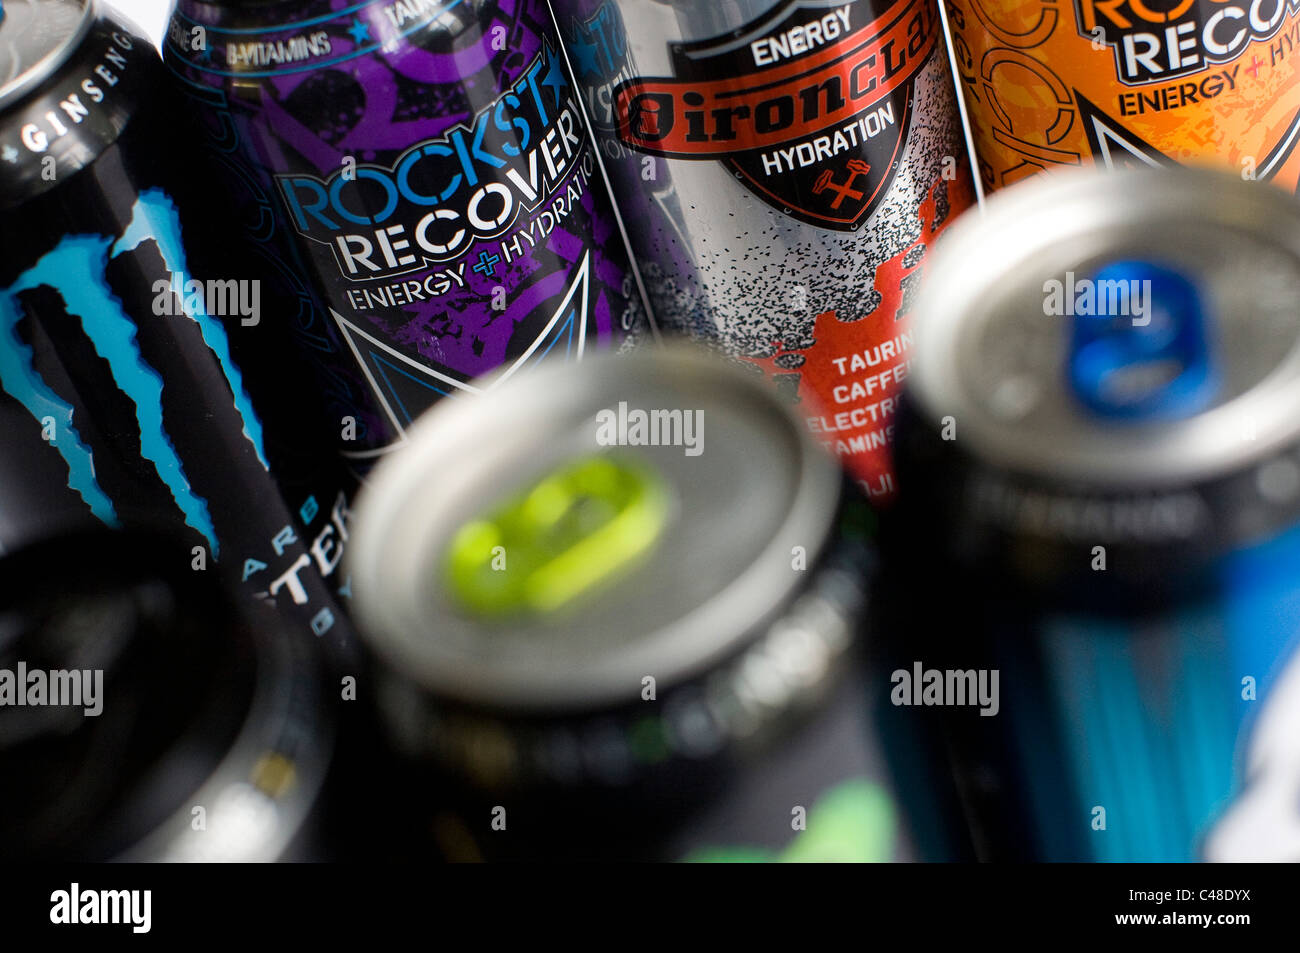 A mix os RockStar, Monster, AMP and Red Bull energy drinks.  Stock Photo